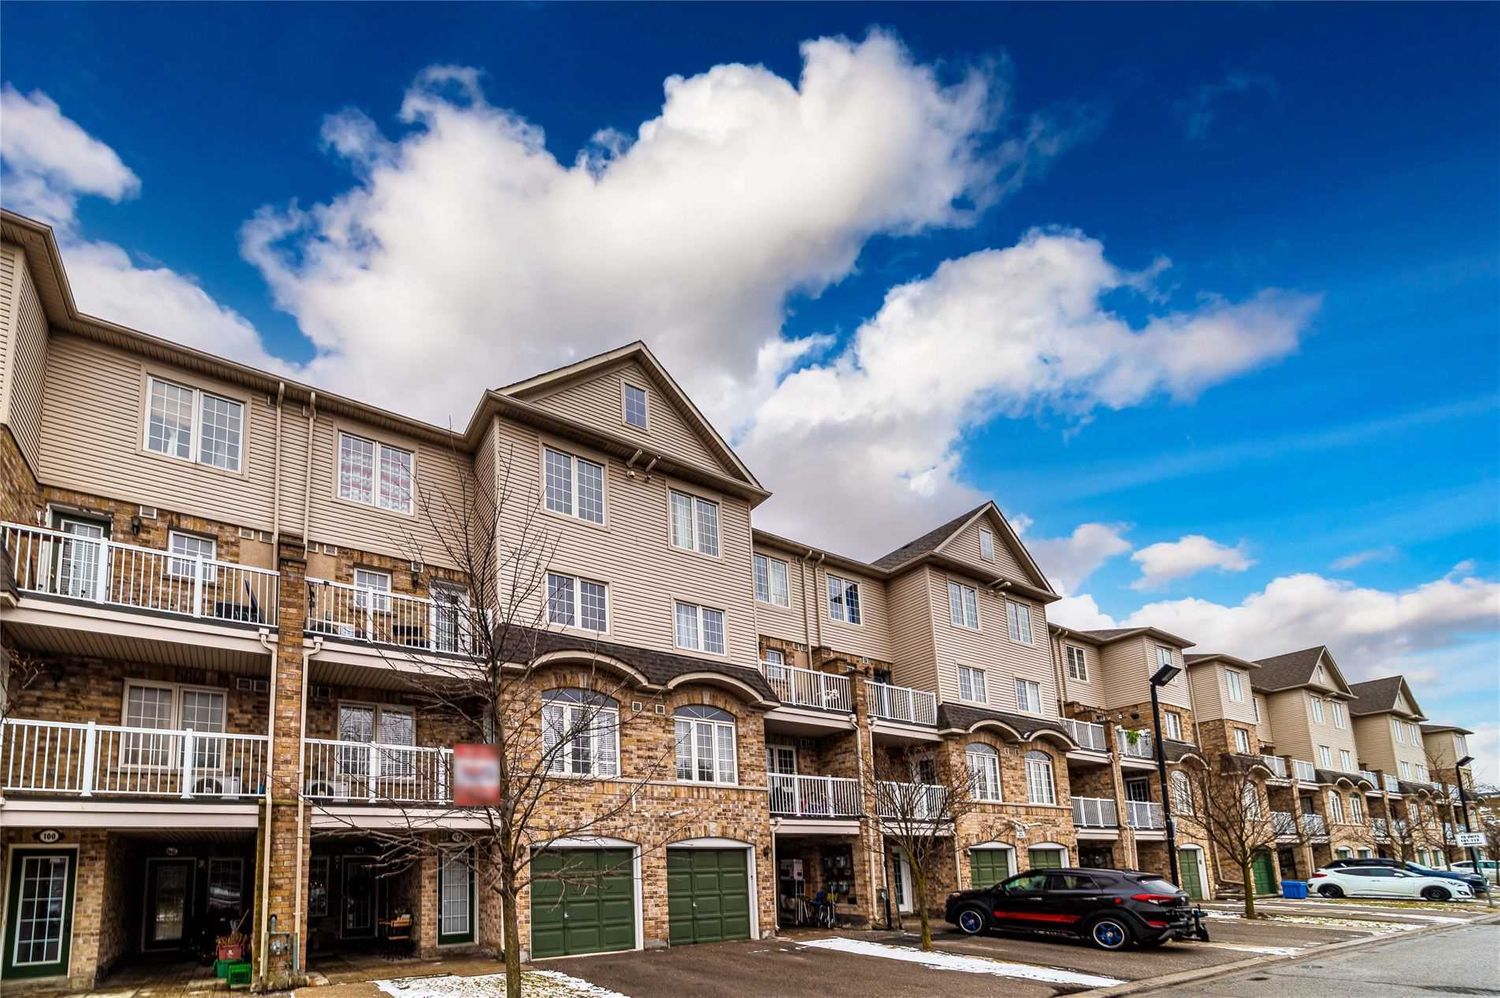 42 Pinery Tr. Woodside Village Townhomes is located in  Scarborough, Toronto - image #1 of 2